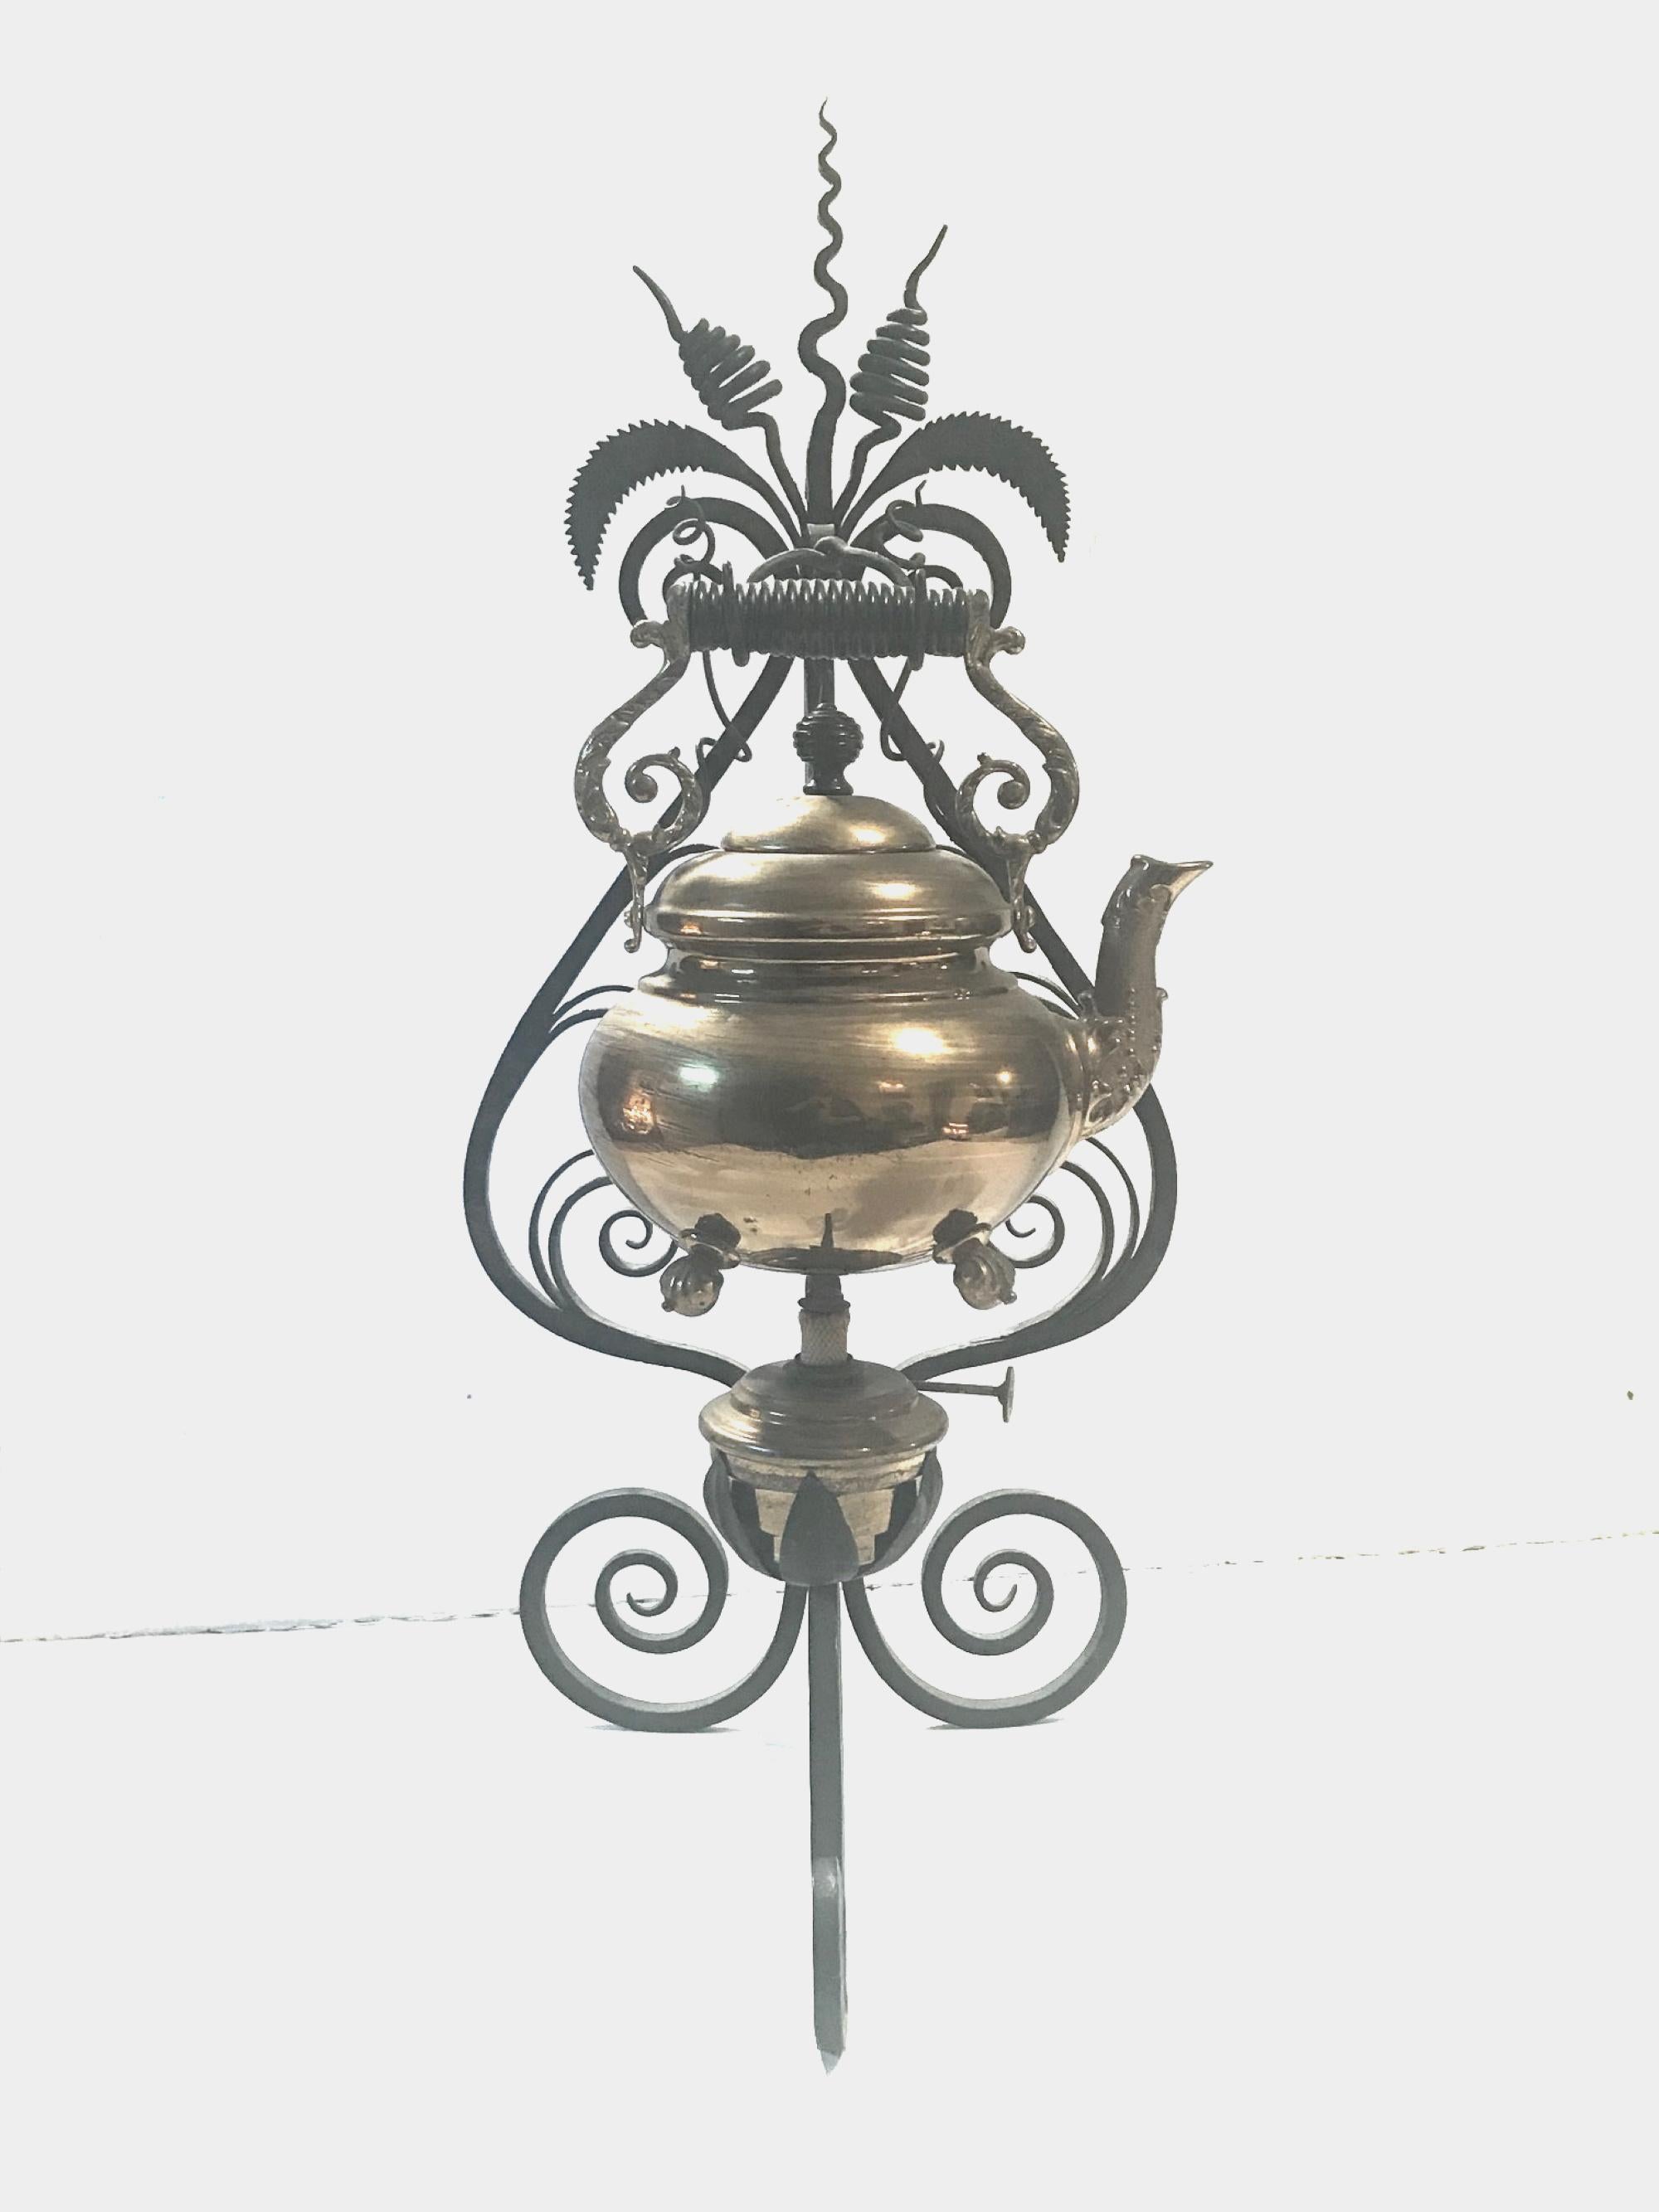 19th century English brass tea kettle warmer rare wrought iron stand.

This tall, Victorian wrought iron stand is a scrolled tripod warmer created with tremendous craftsmanship. The brass kettle is decoratively embossed on the spout and the